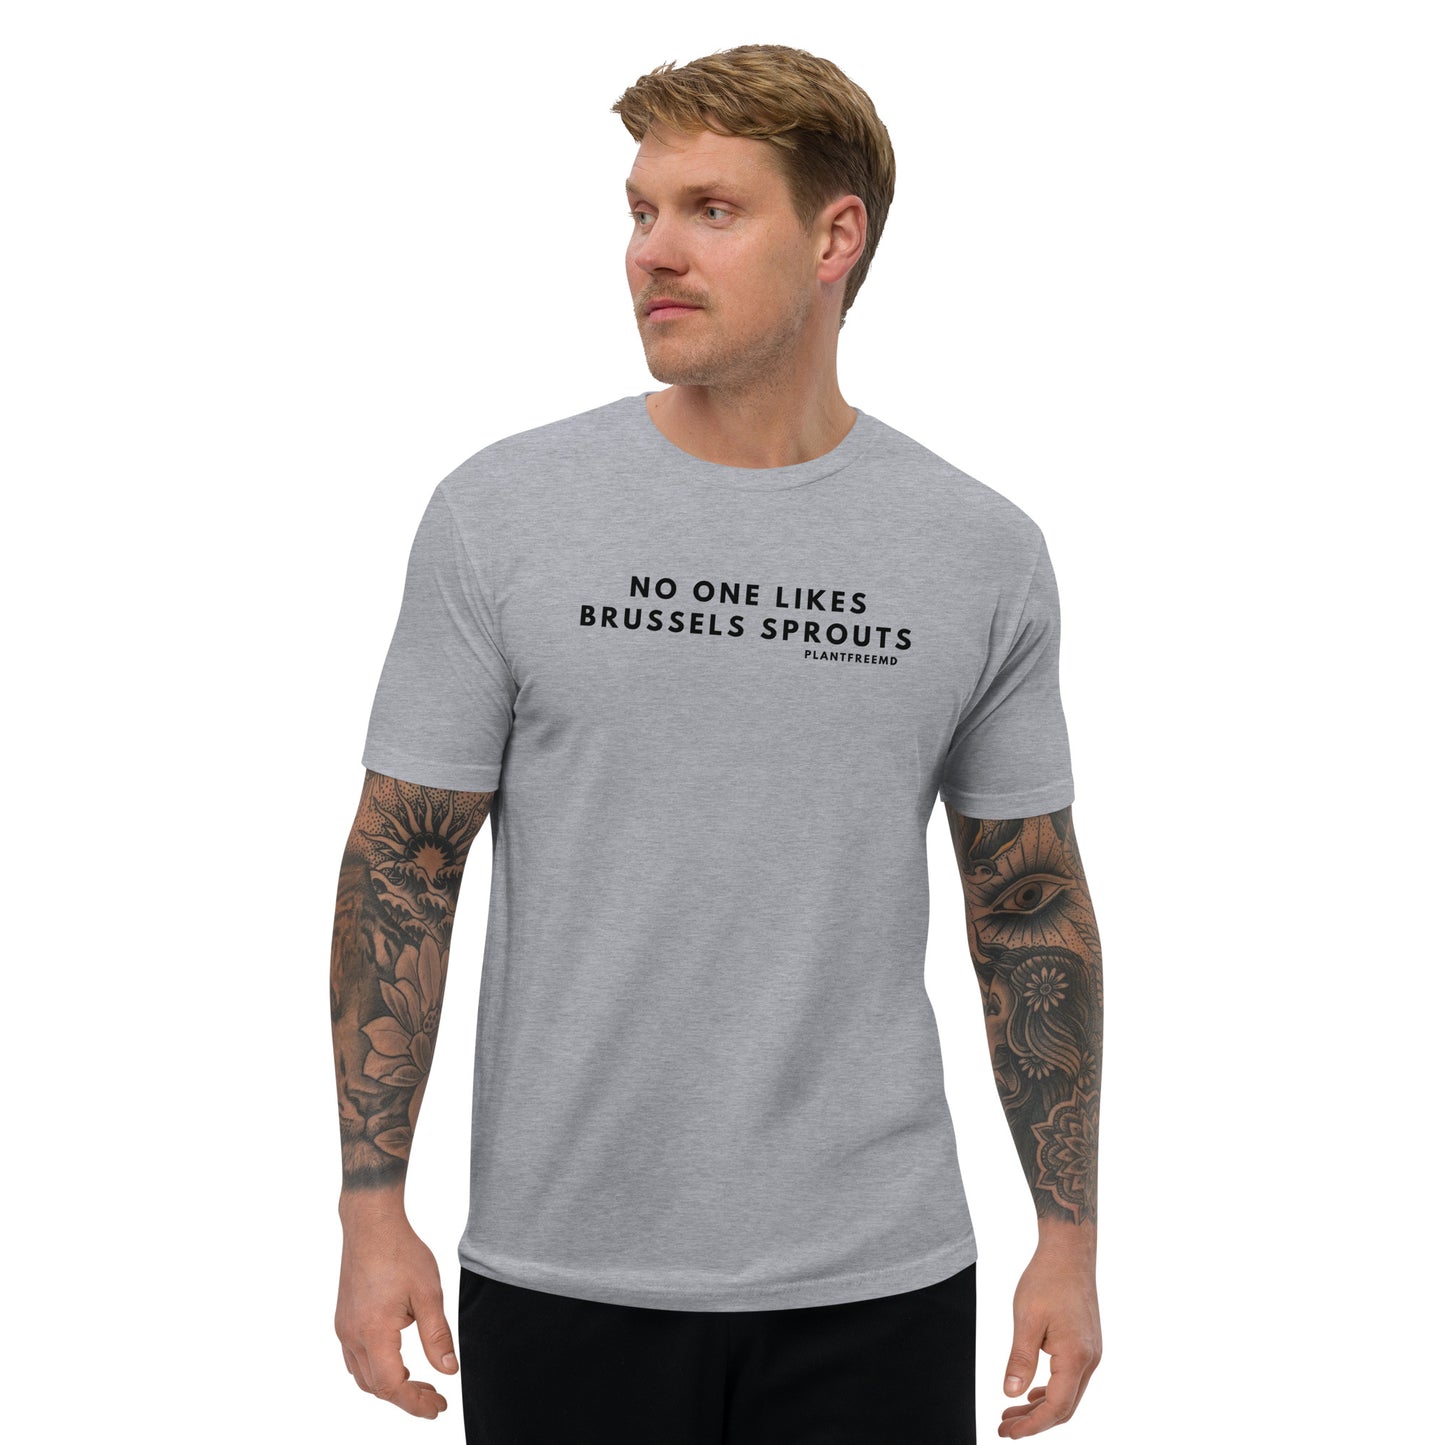 No One Likes Brussels Sprouts Men's Fitted T-shirt